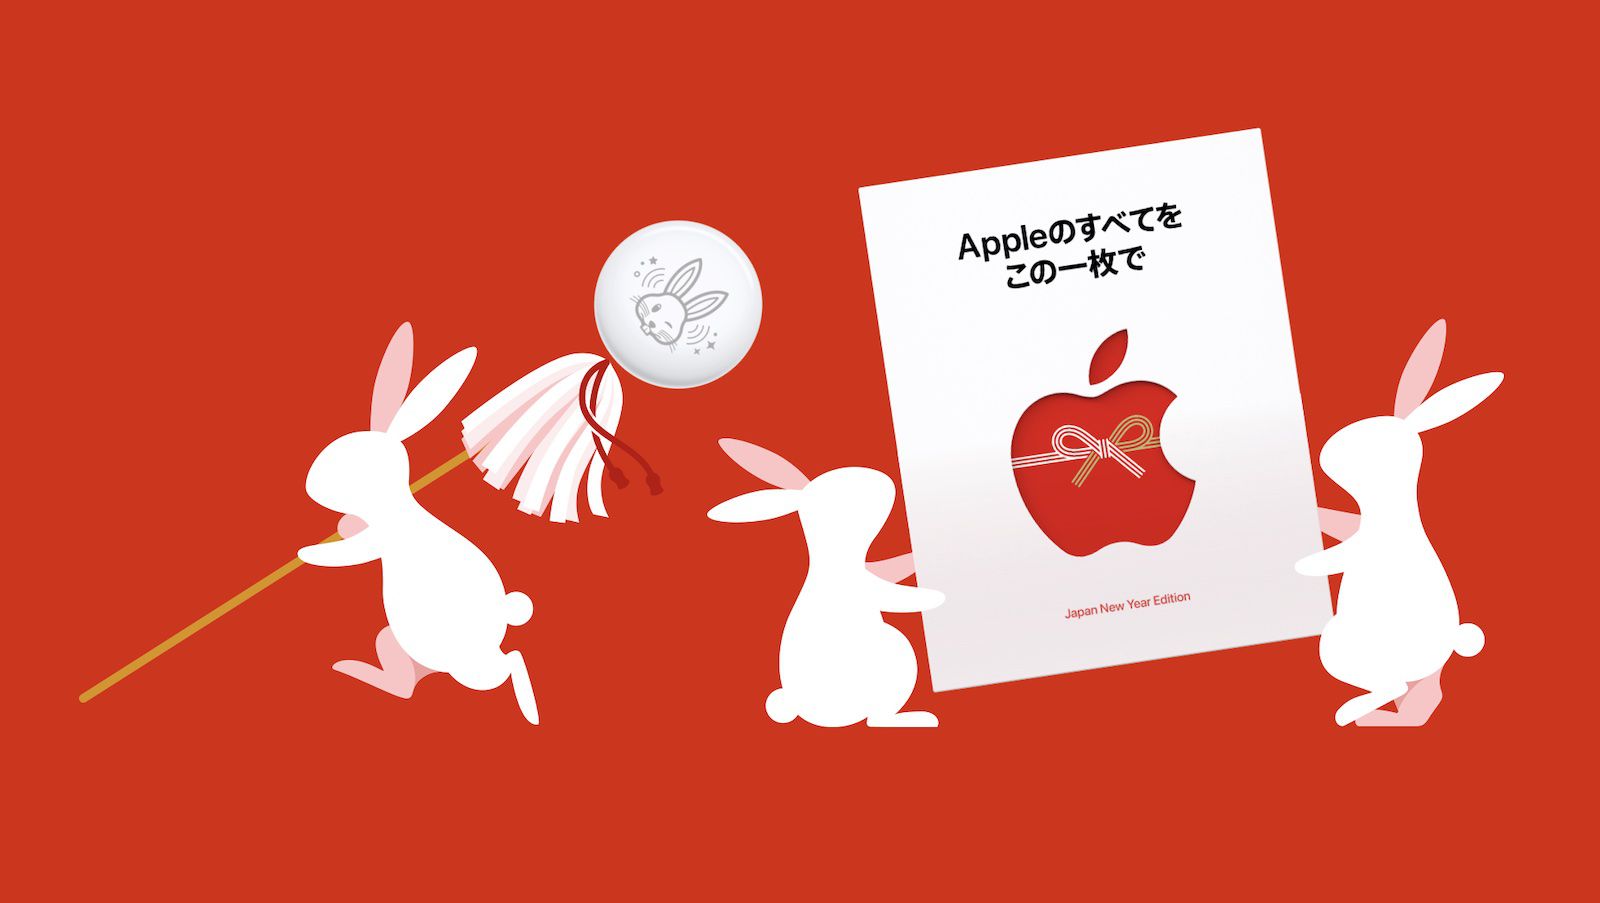 Apple Announces Japanese New Year Promotion With Limited-Edition AirTag - MacRumors